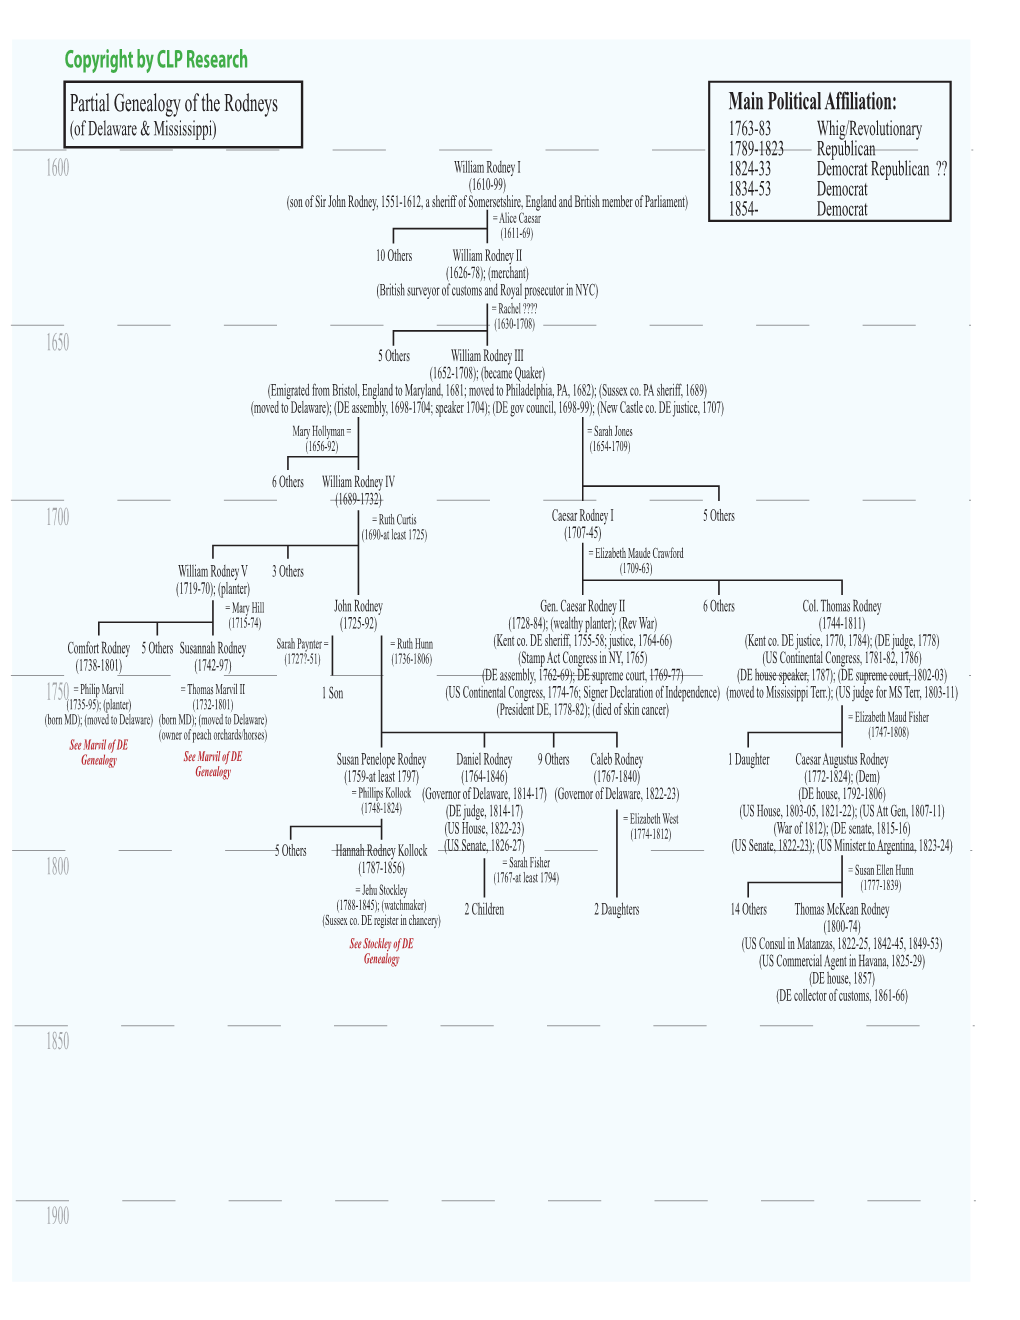 Copyright by CLP Research 1600 1700 1750 1800 1850 1650 1900 Partial Genealogy of the Rodneys Main Political Affiliation